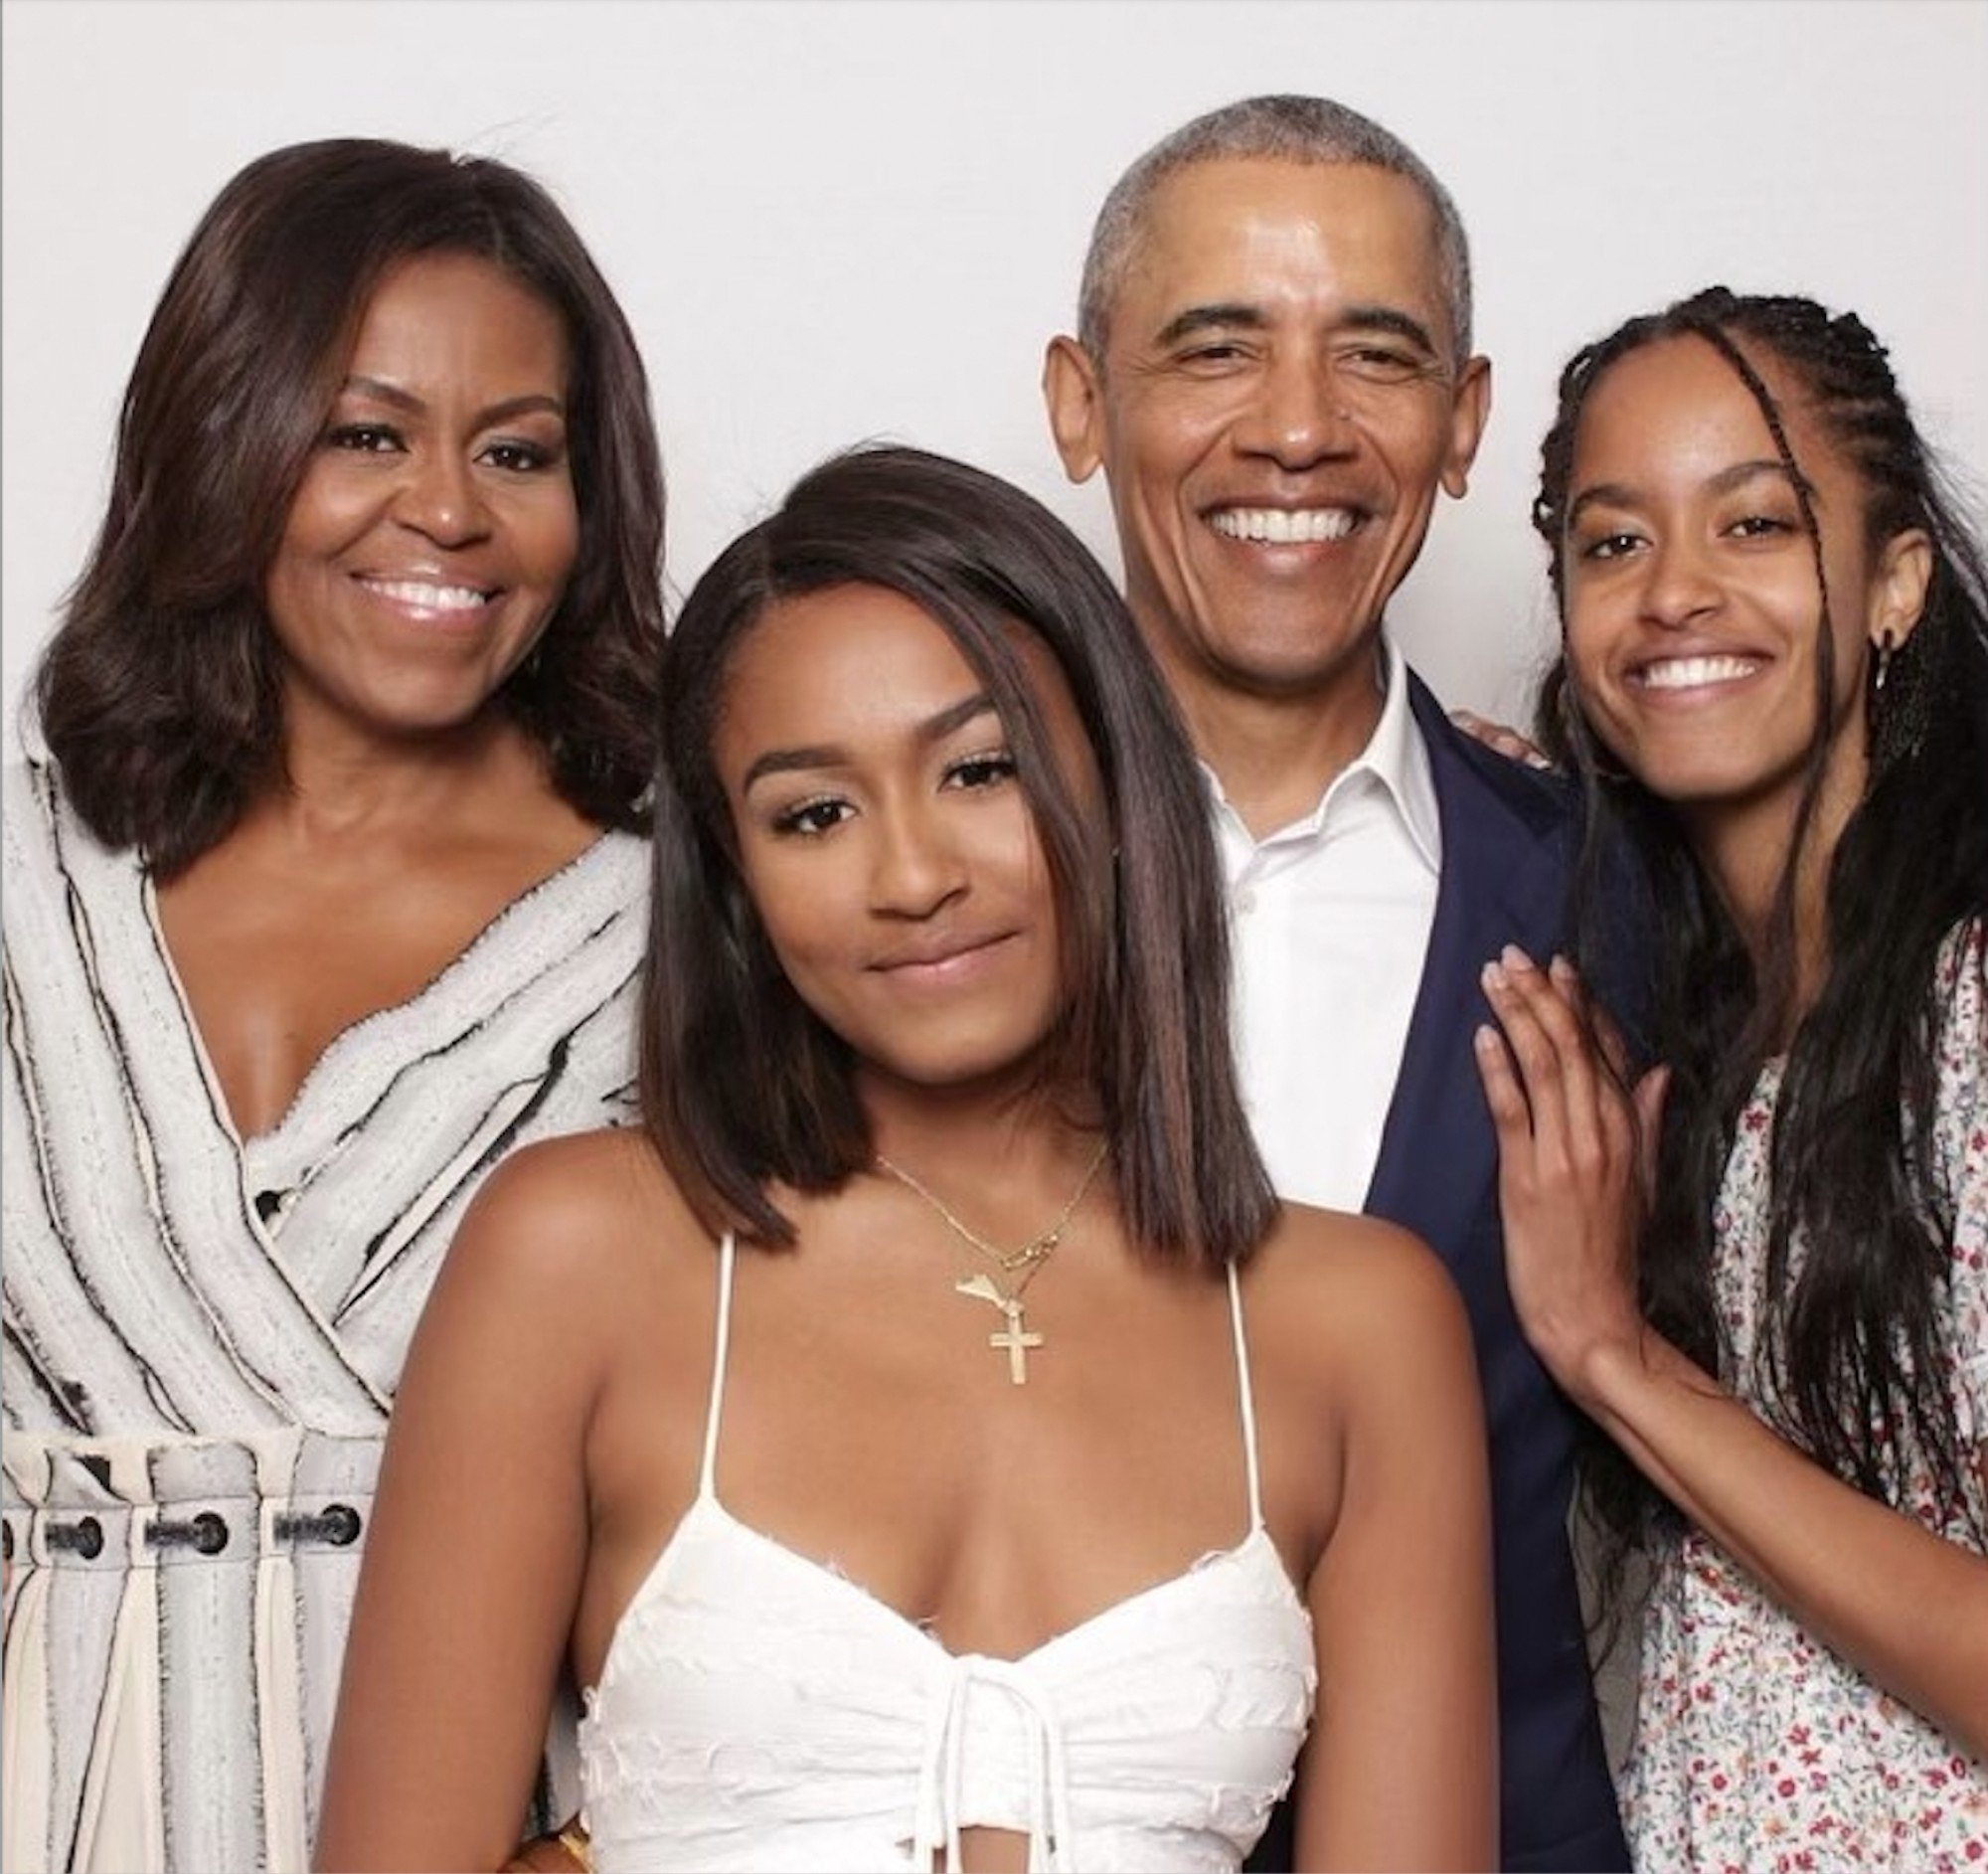 Malia and Sasha Obama's post-White House-life: Barack and Michelle's Gen Z daughters live in Los Angeles, party with Drake, and go on family holidays with Tom Hanks | South China Morning Post